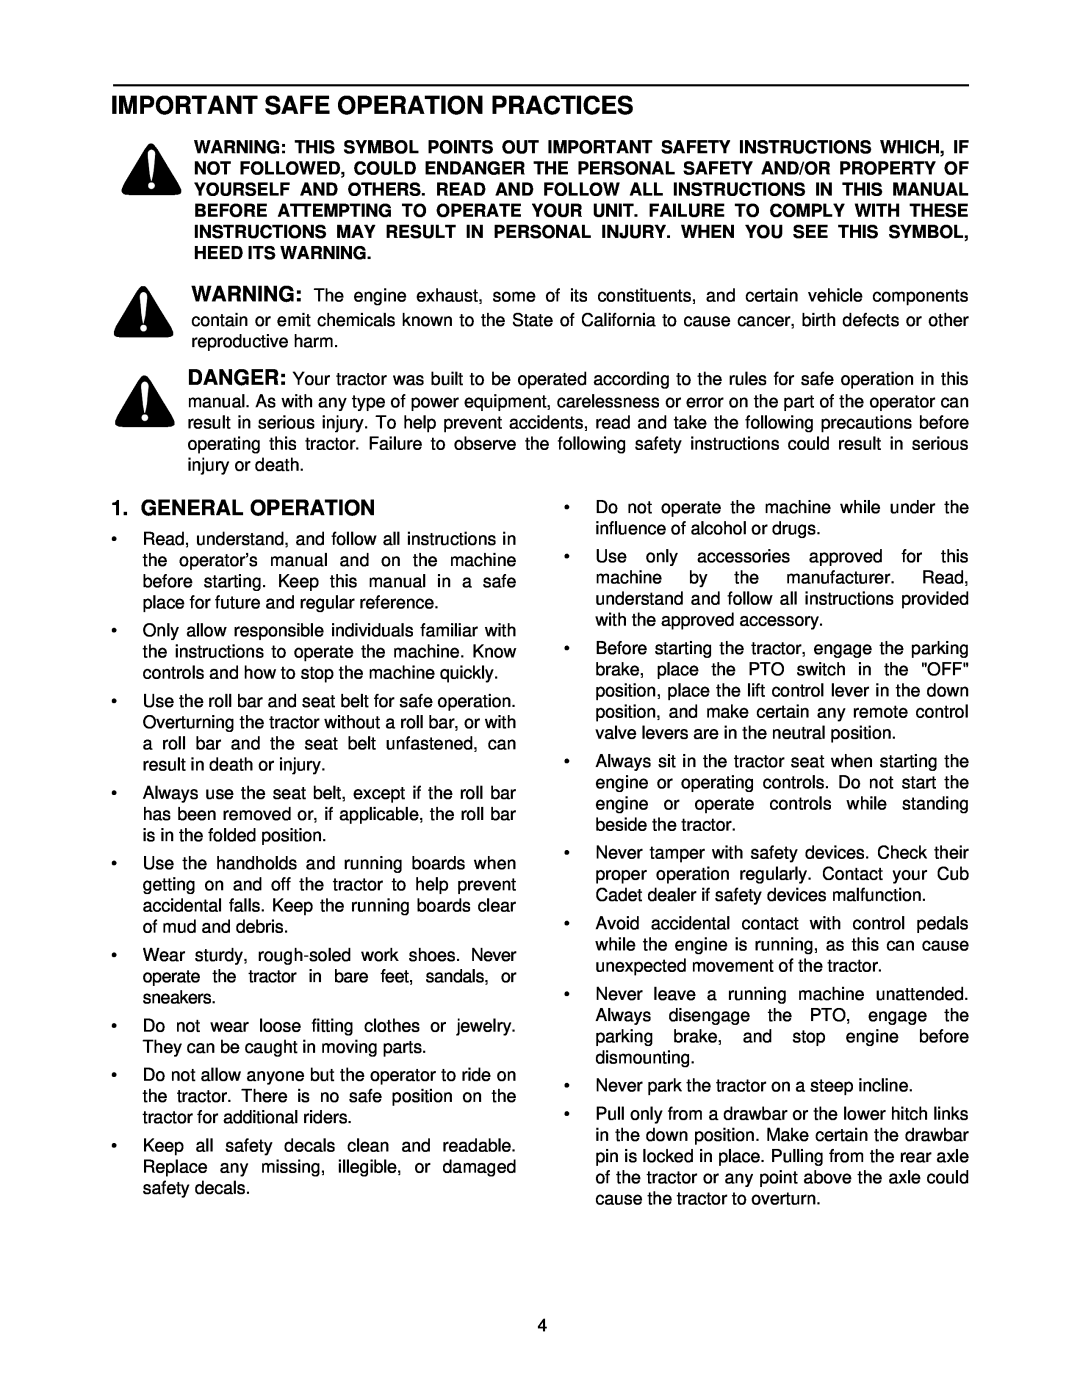 Cub Cadet 7264 manual Important Safe Operation Practices, General Operation 